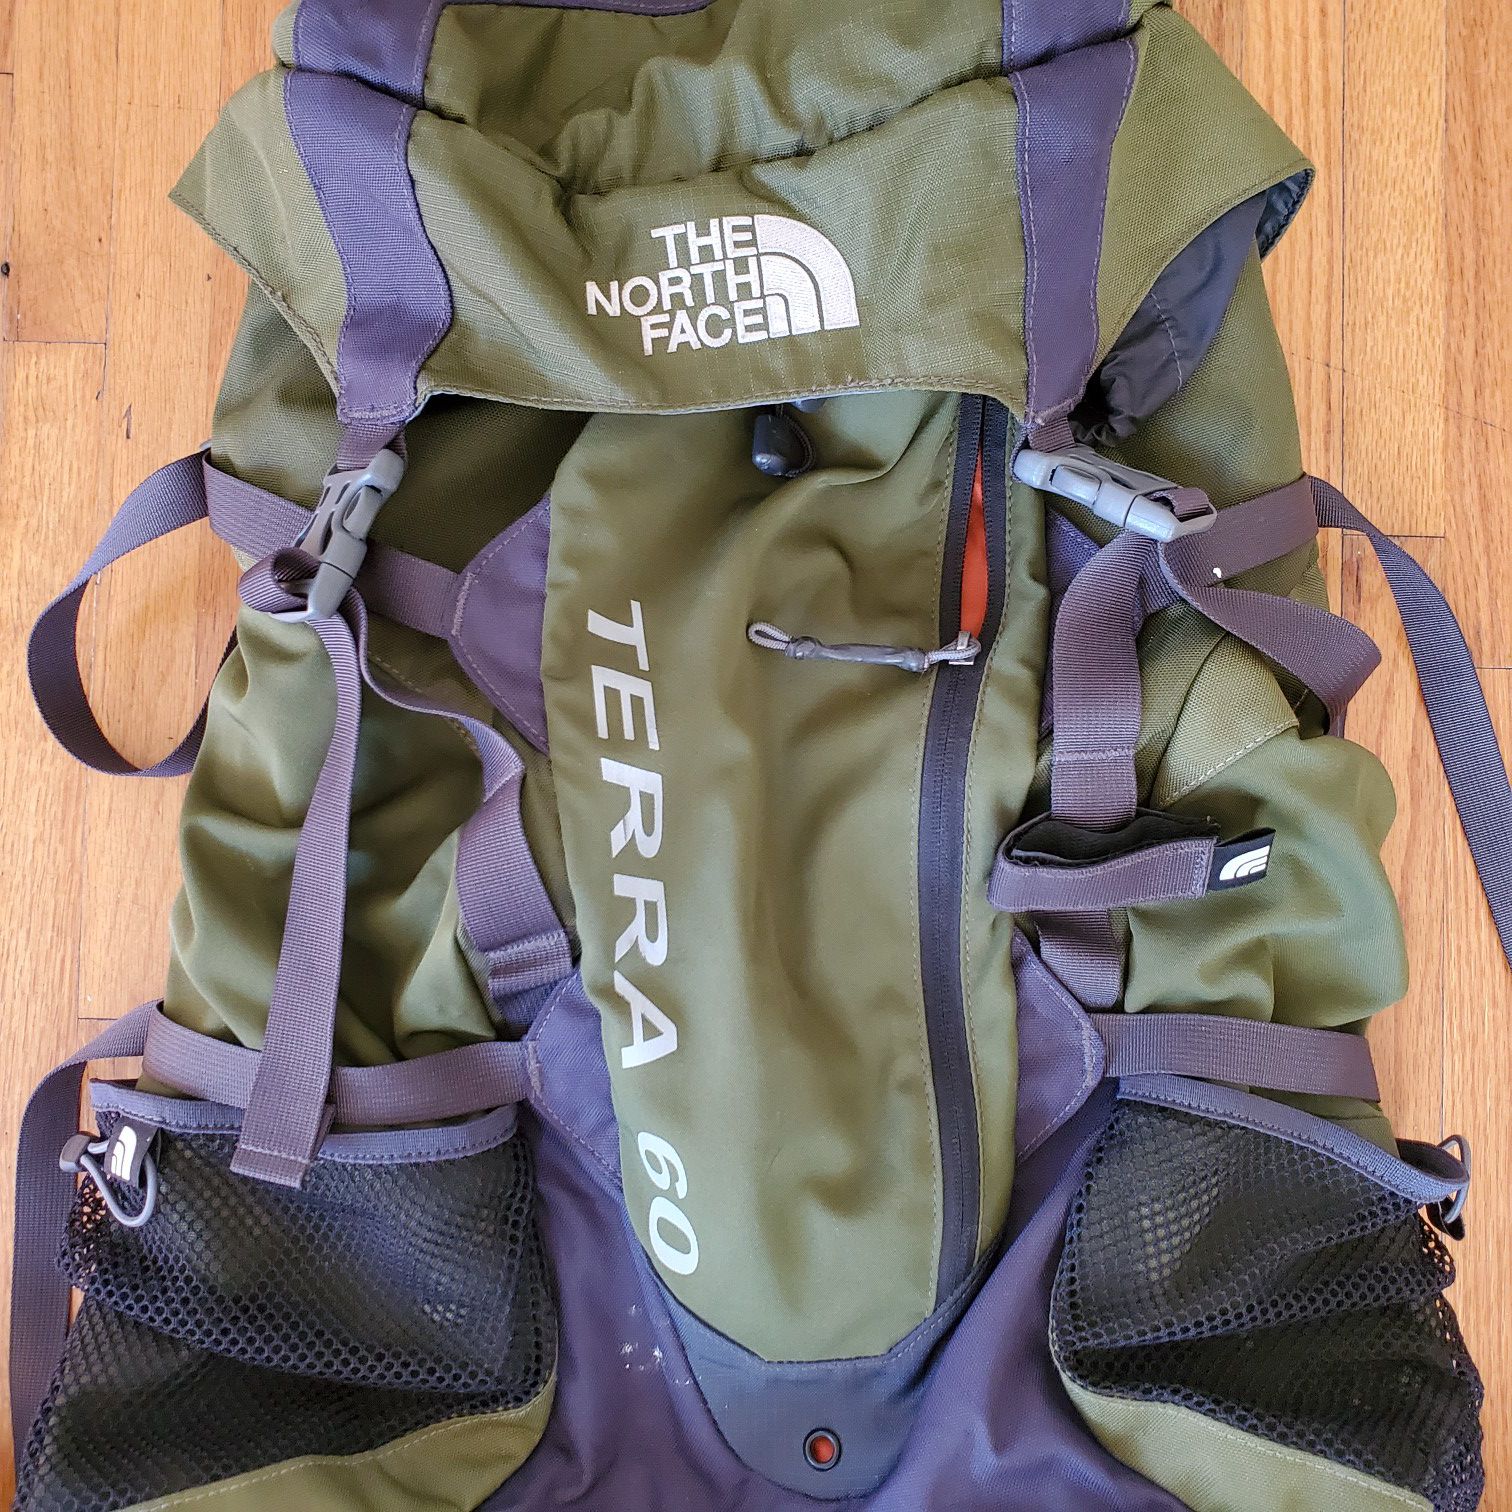 The North Face Terra 60 Backpacking bag